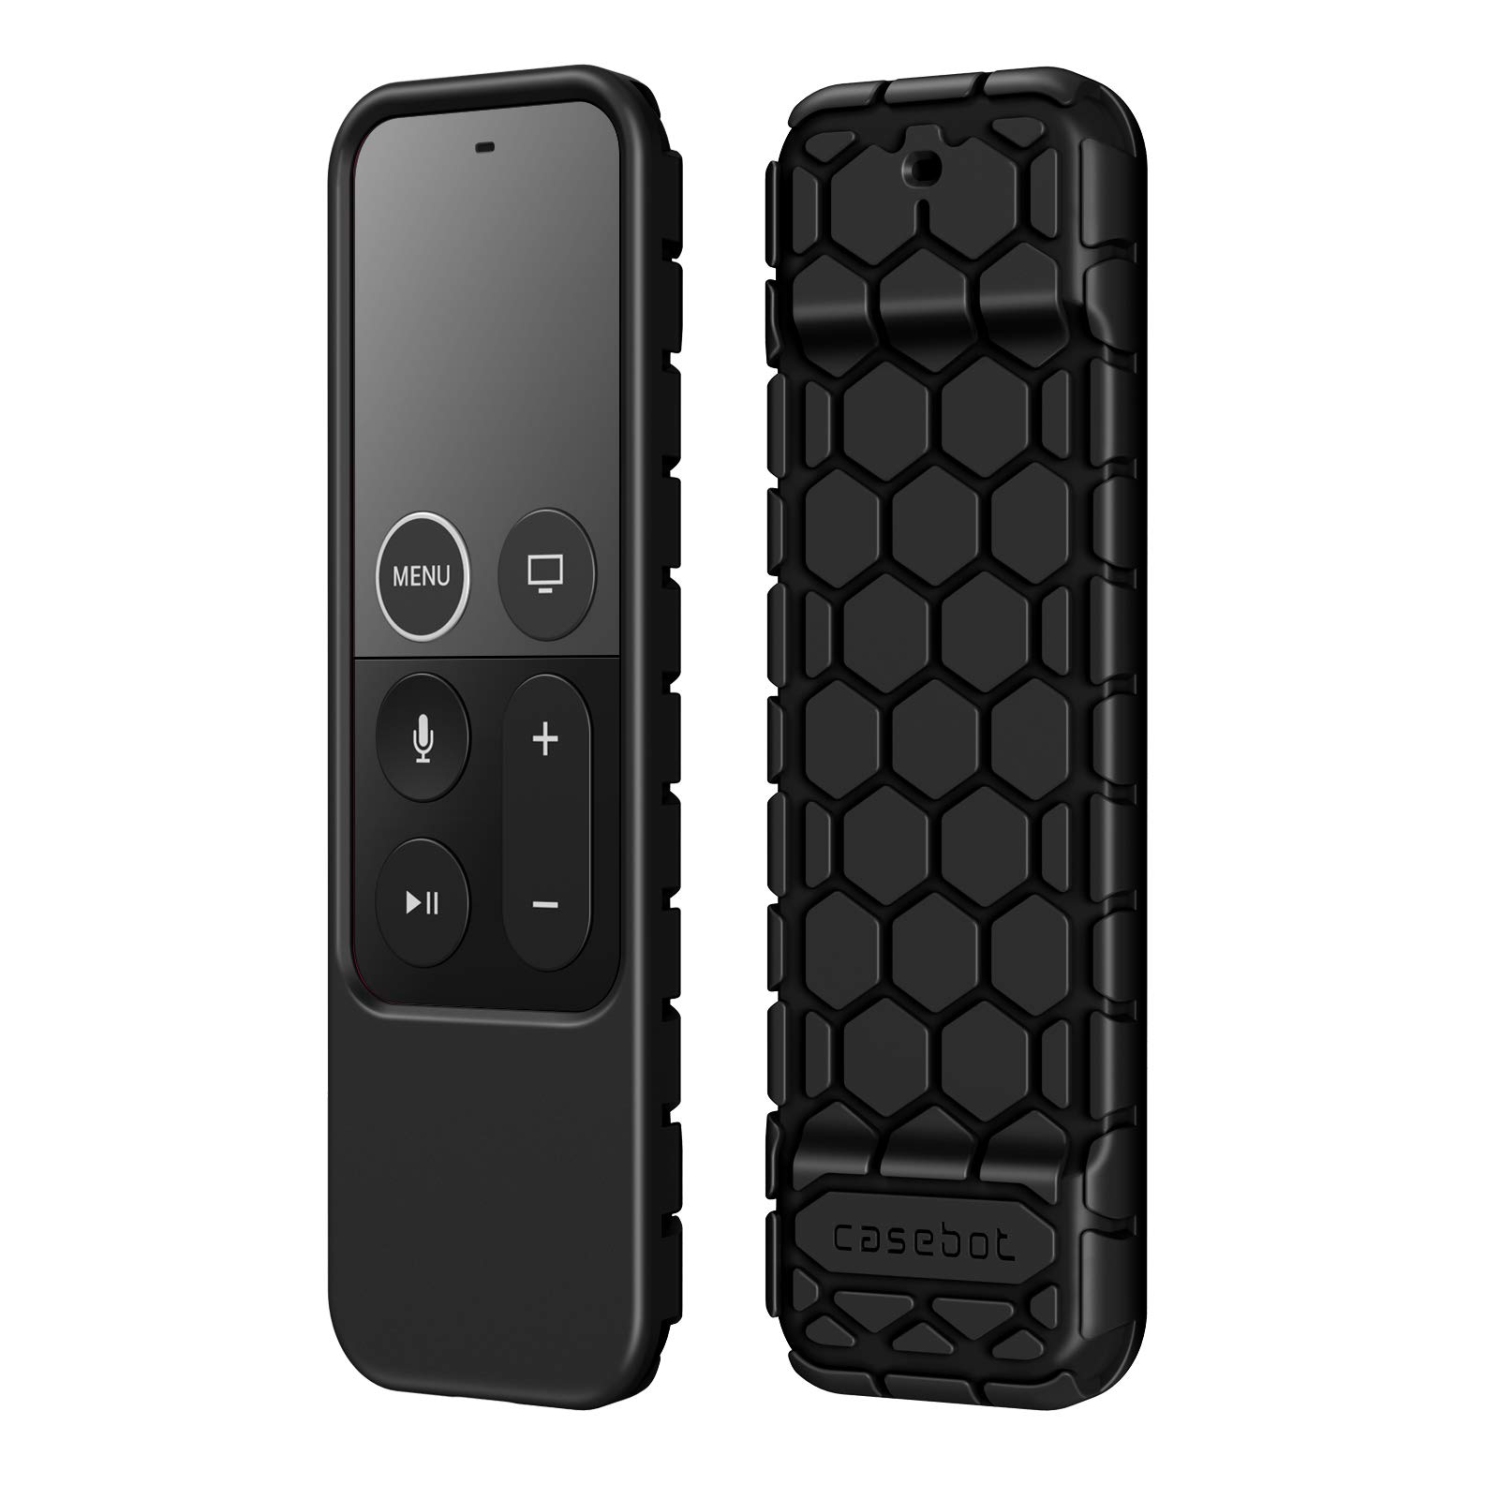 Protective Case for Apple TV 4K / HD Siri Remote (1st Generation) - Honey Comb Lightweight Anti Slip Shockproof Silicone Cover for Apple TV 4K 5th/ 4th Gen Siri Remote Controller